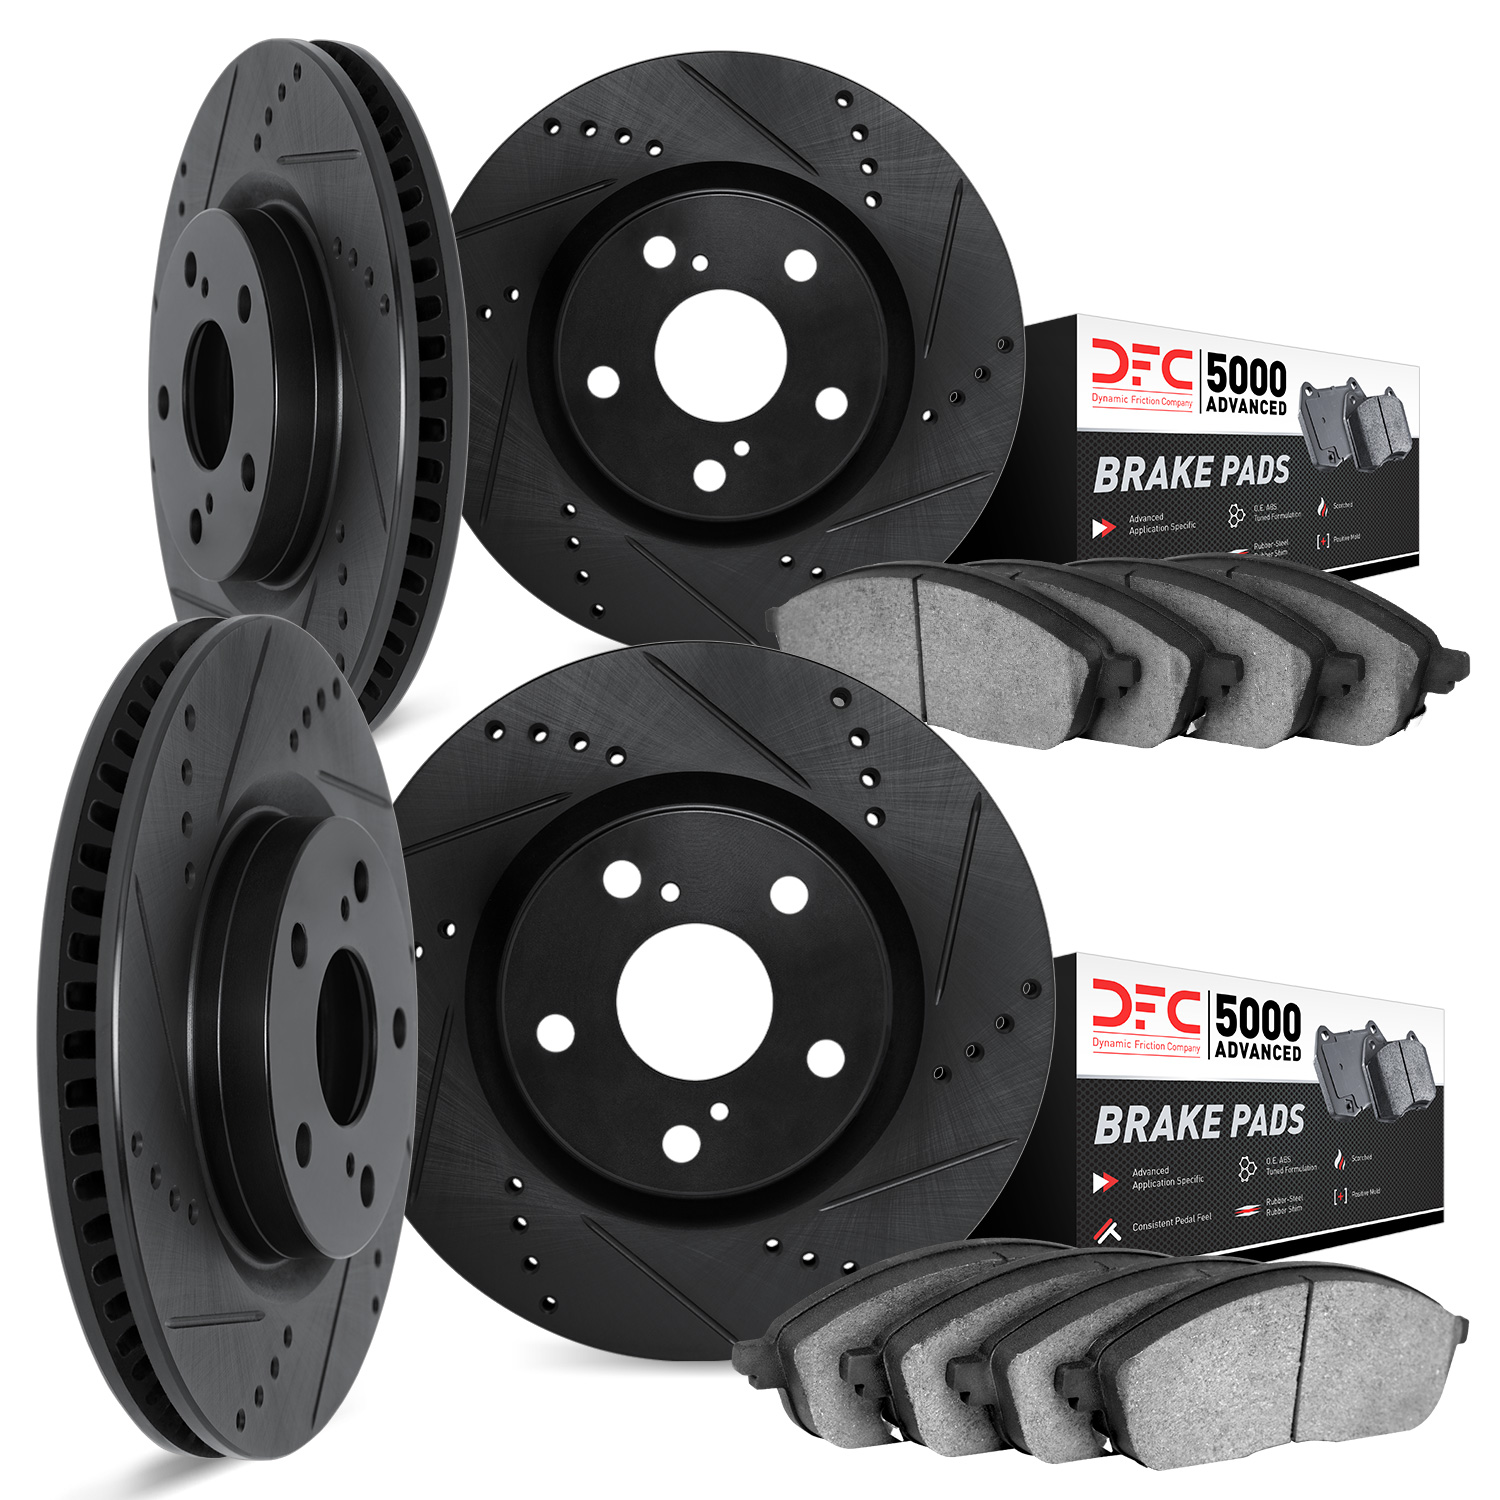 8504-31058 Drilled/Slotted Brake Rotors w/5000 Advanced Brake Pads Kit [Black], Fits Select BMW, Position: Front and Rear